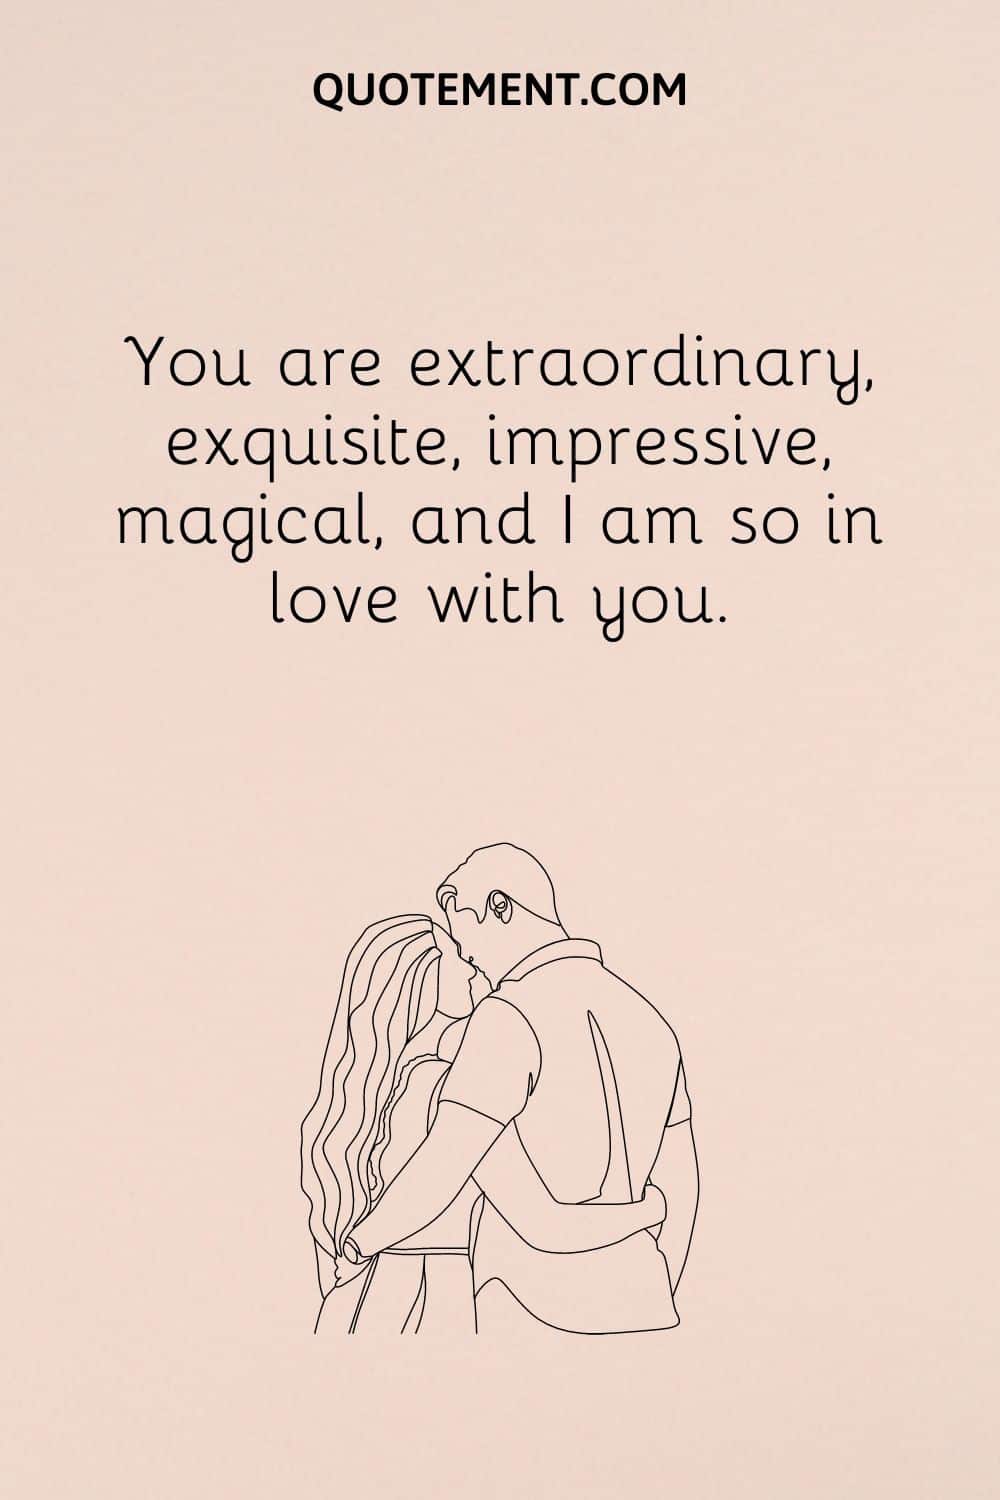 you are extraordinary, exquisite, impressive, magical, and I am so in love with you.